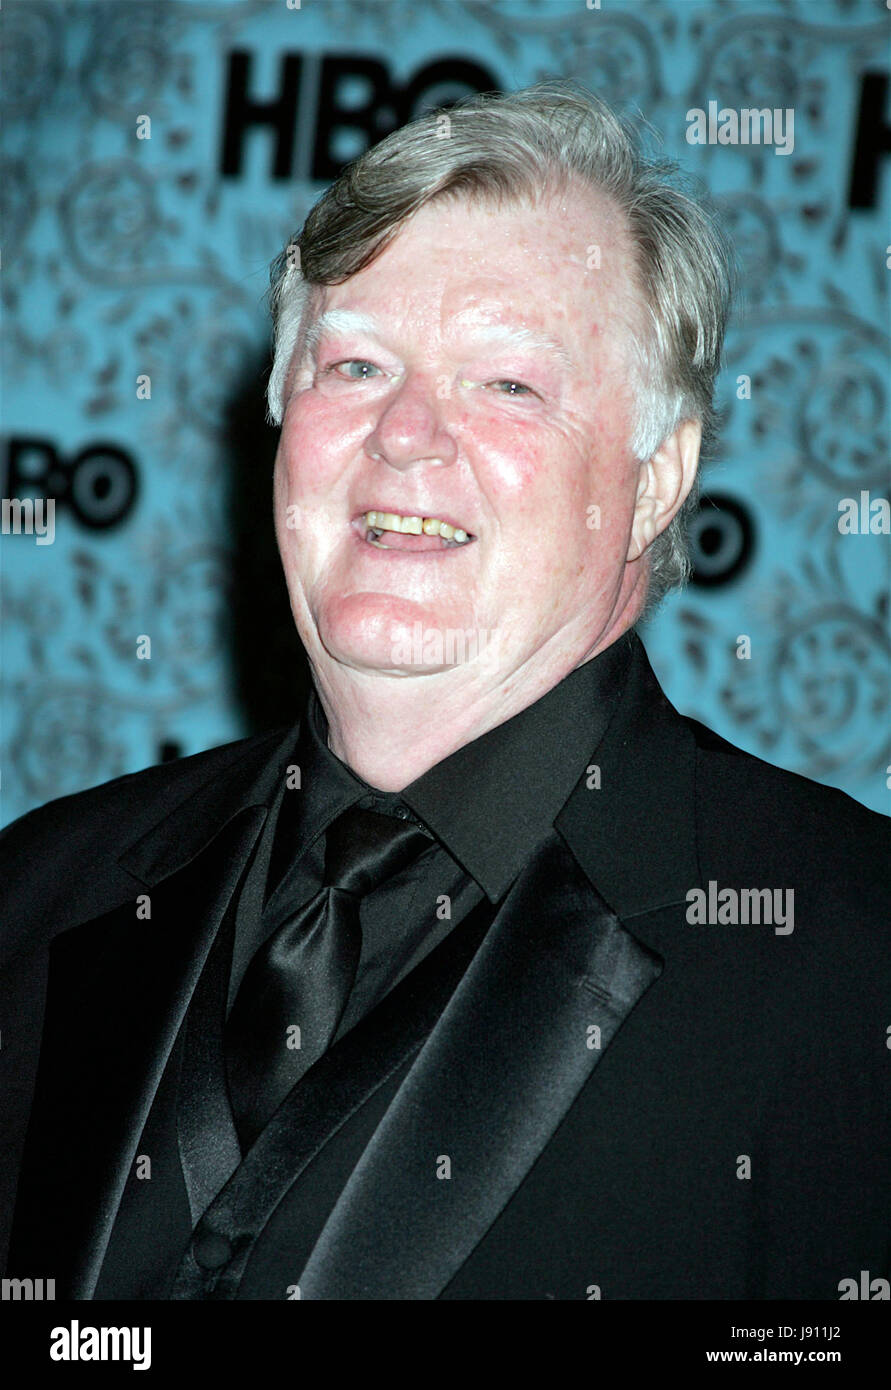 File. 31st May, 2017. Robert Michael Morris (May 6, 1940 to May 30, 2017) was an American actor. He was known for his co-starring role as Mickey Deane in the reality television spoof The Comeback and as Mr. Lunt in the short-lived series Running Wilde. He also wrote over 100 plays. Pictured: Sep 18, 2004; Los Angeles, CA, USA; ROBERT MICHAEL MORRIS at the HBO's Post Emmy Party at The Pacific Design Center, Los Angeles, California. Credit: David Livingston/ZUMAPRESS.com/Alamy Live News Stock Photo